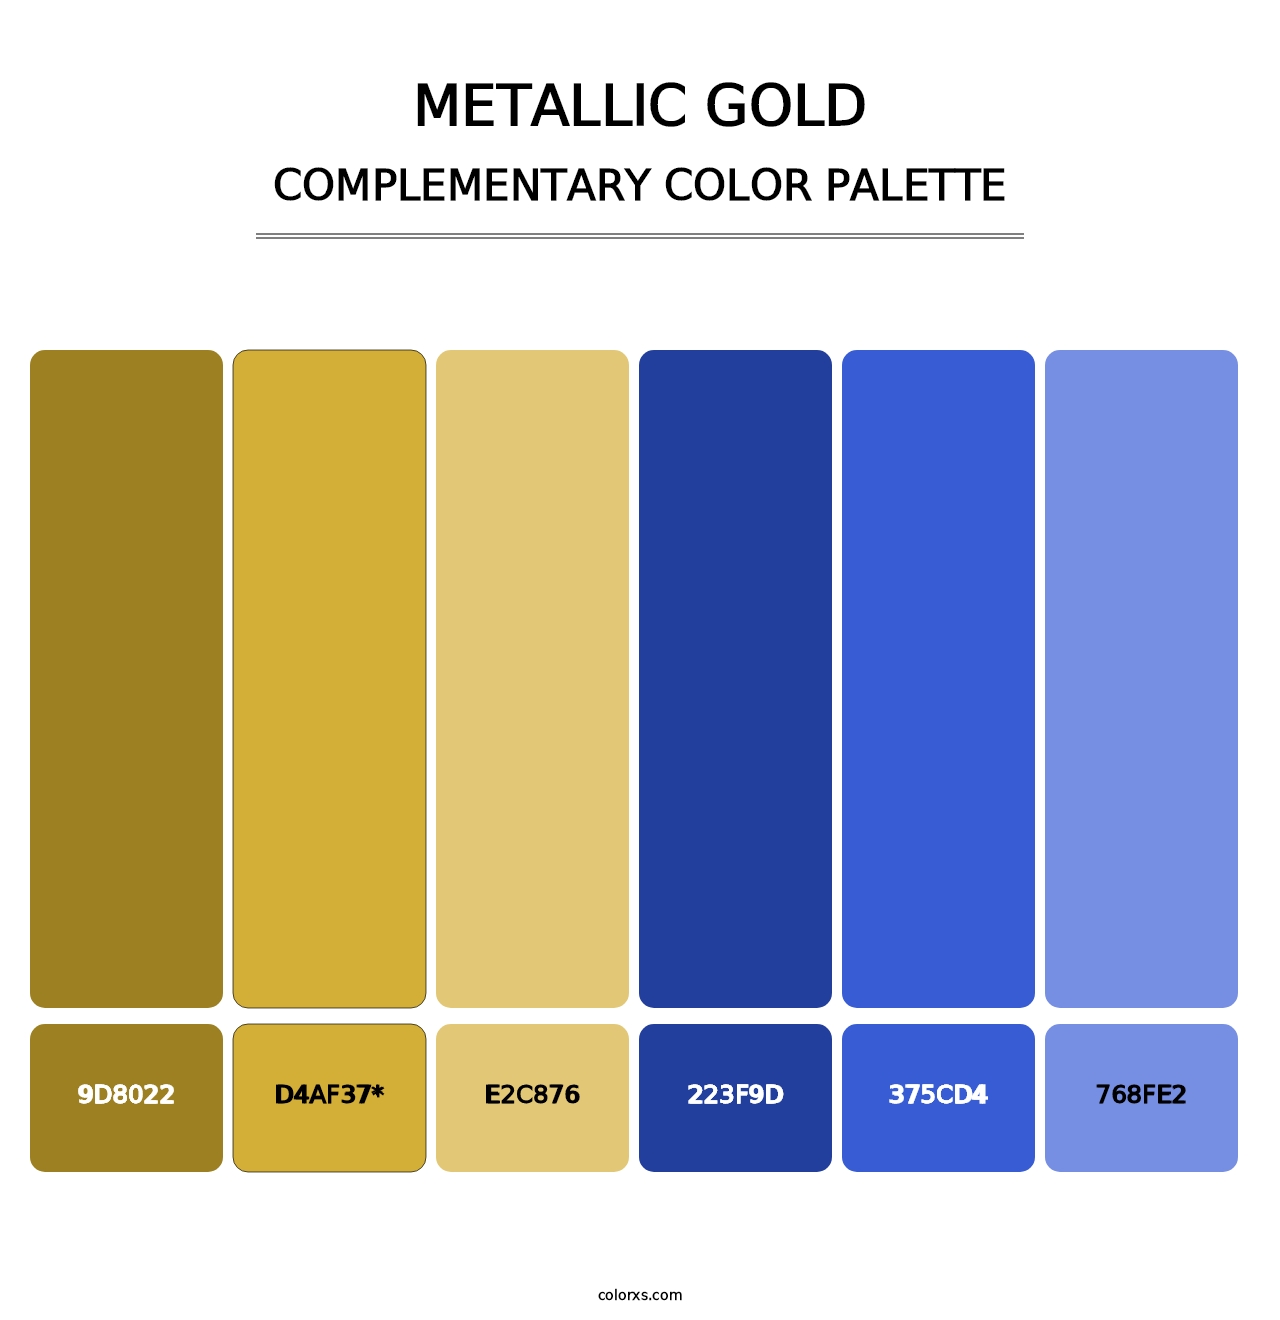 Metallic Gold - Complementary Color Palette